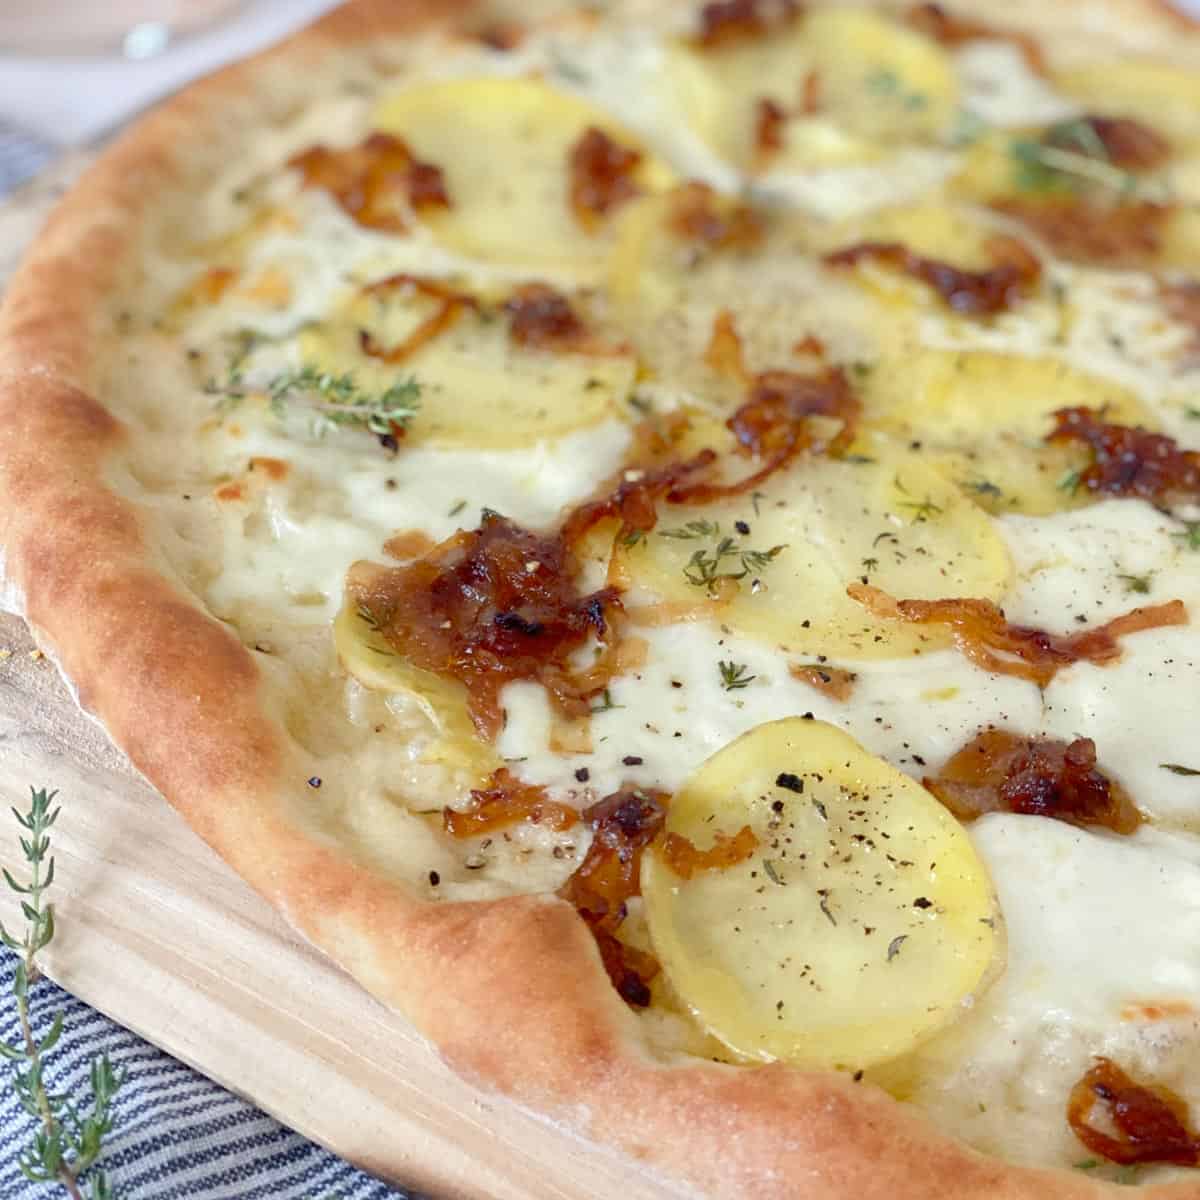 pizza dough topped with caramelized onions and yukon gold potatoes